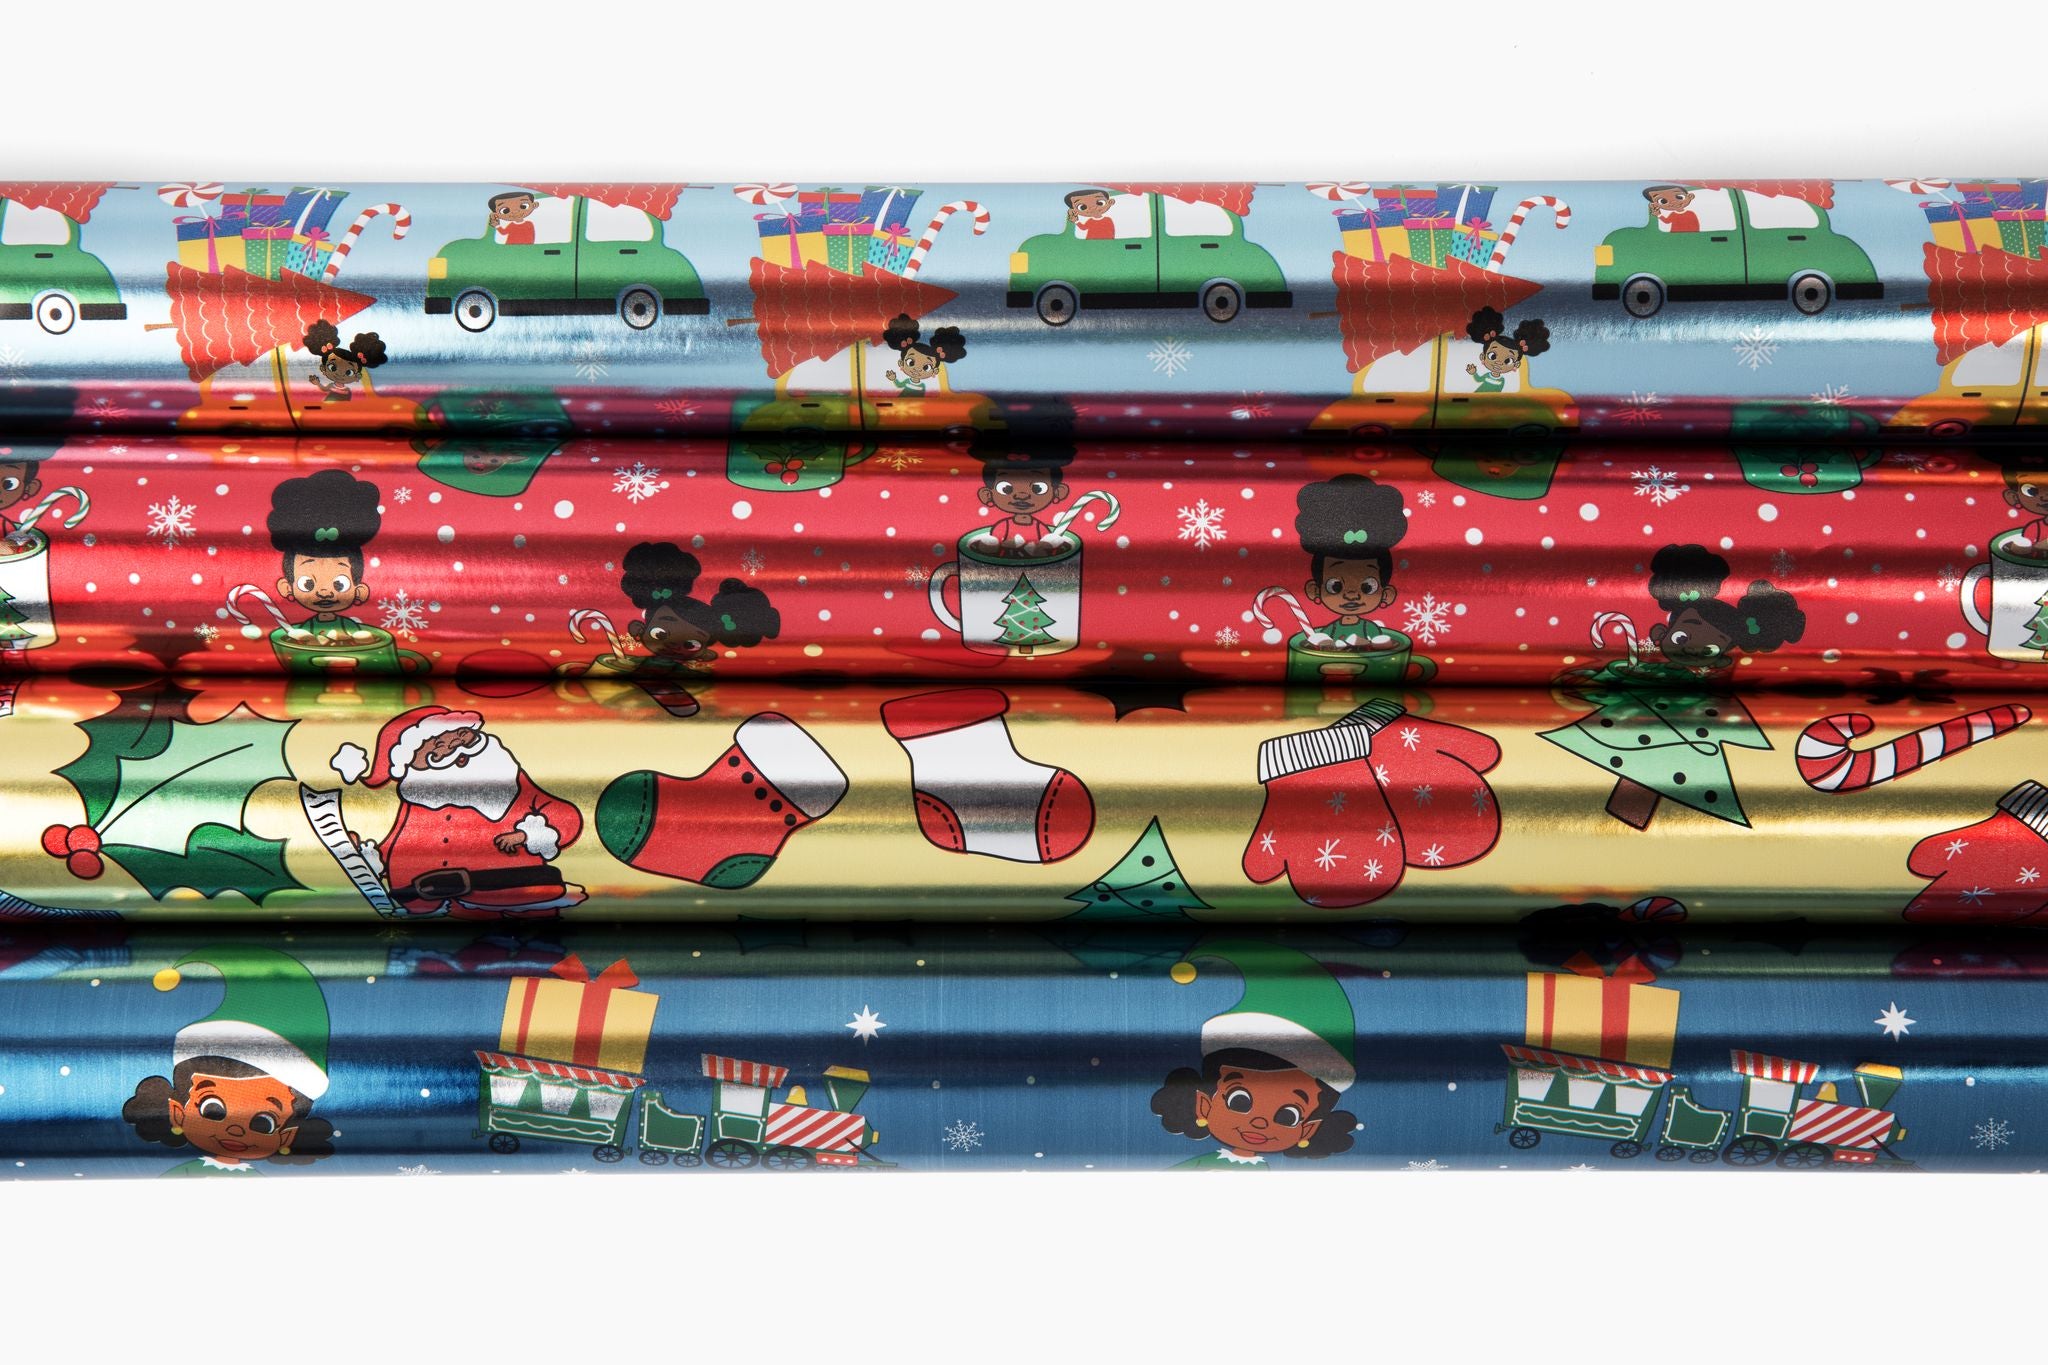 4 roles of foil holiday wrapping paper, all adorned with black people illustrations and stack horizontally on top of each other